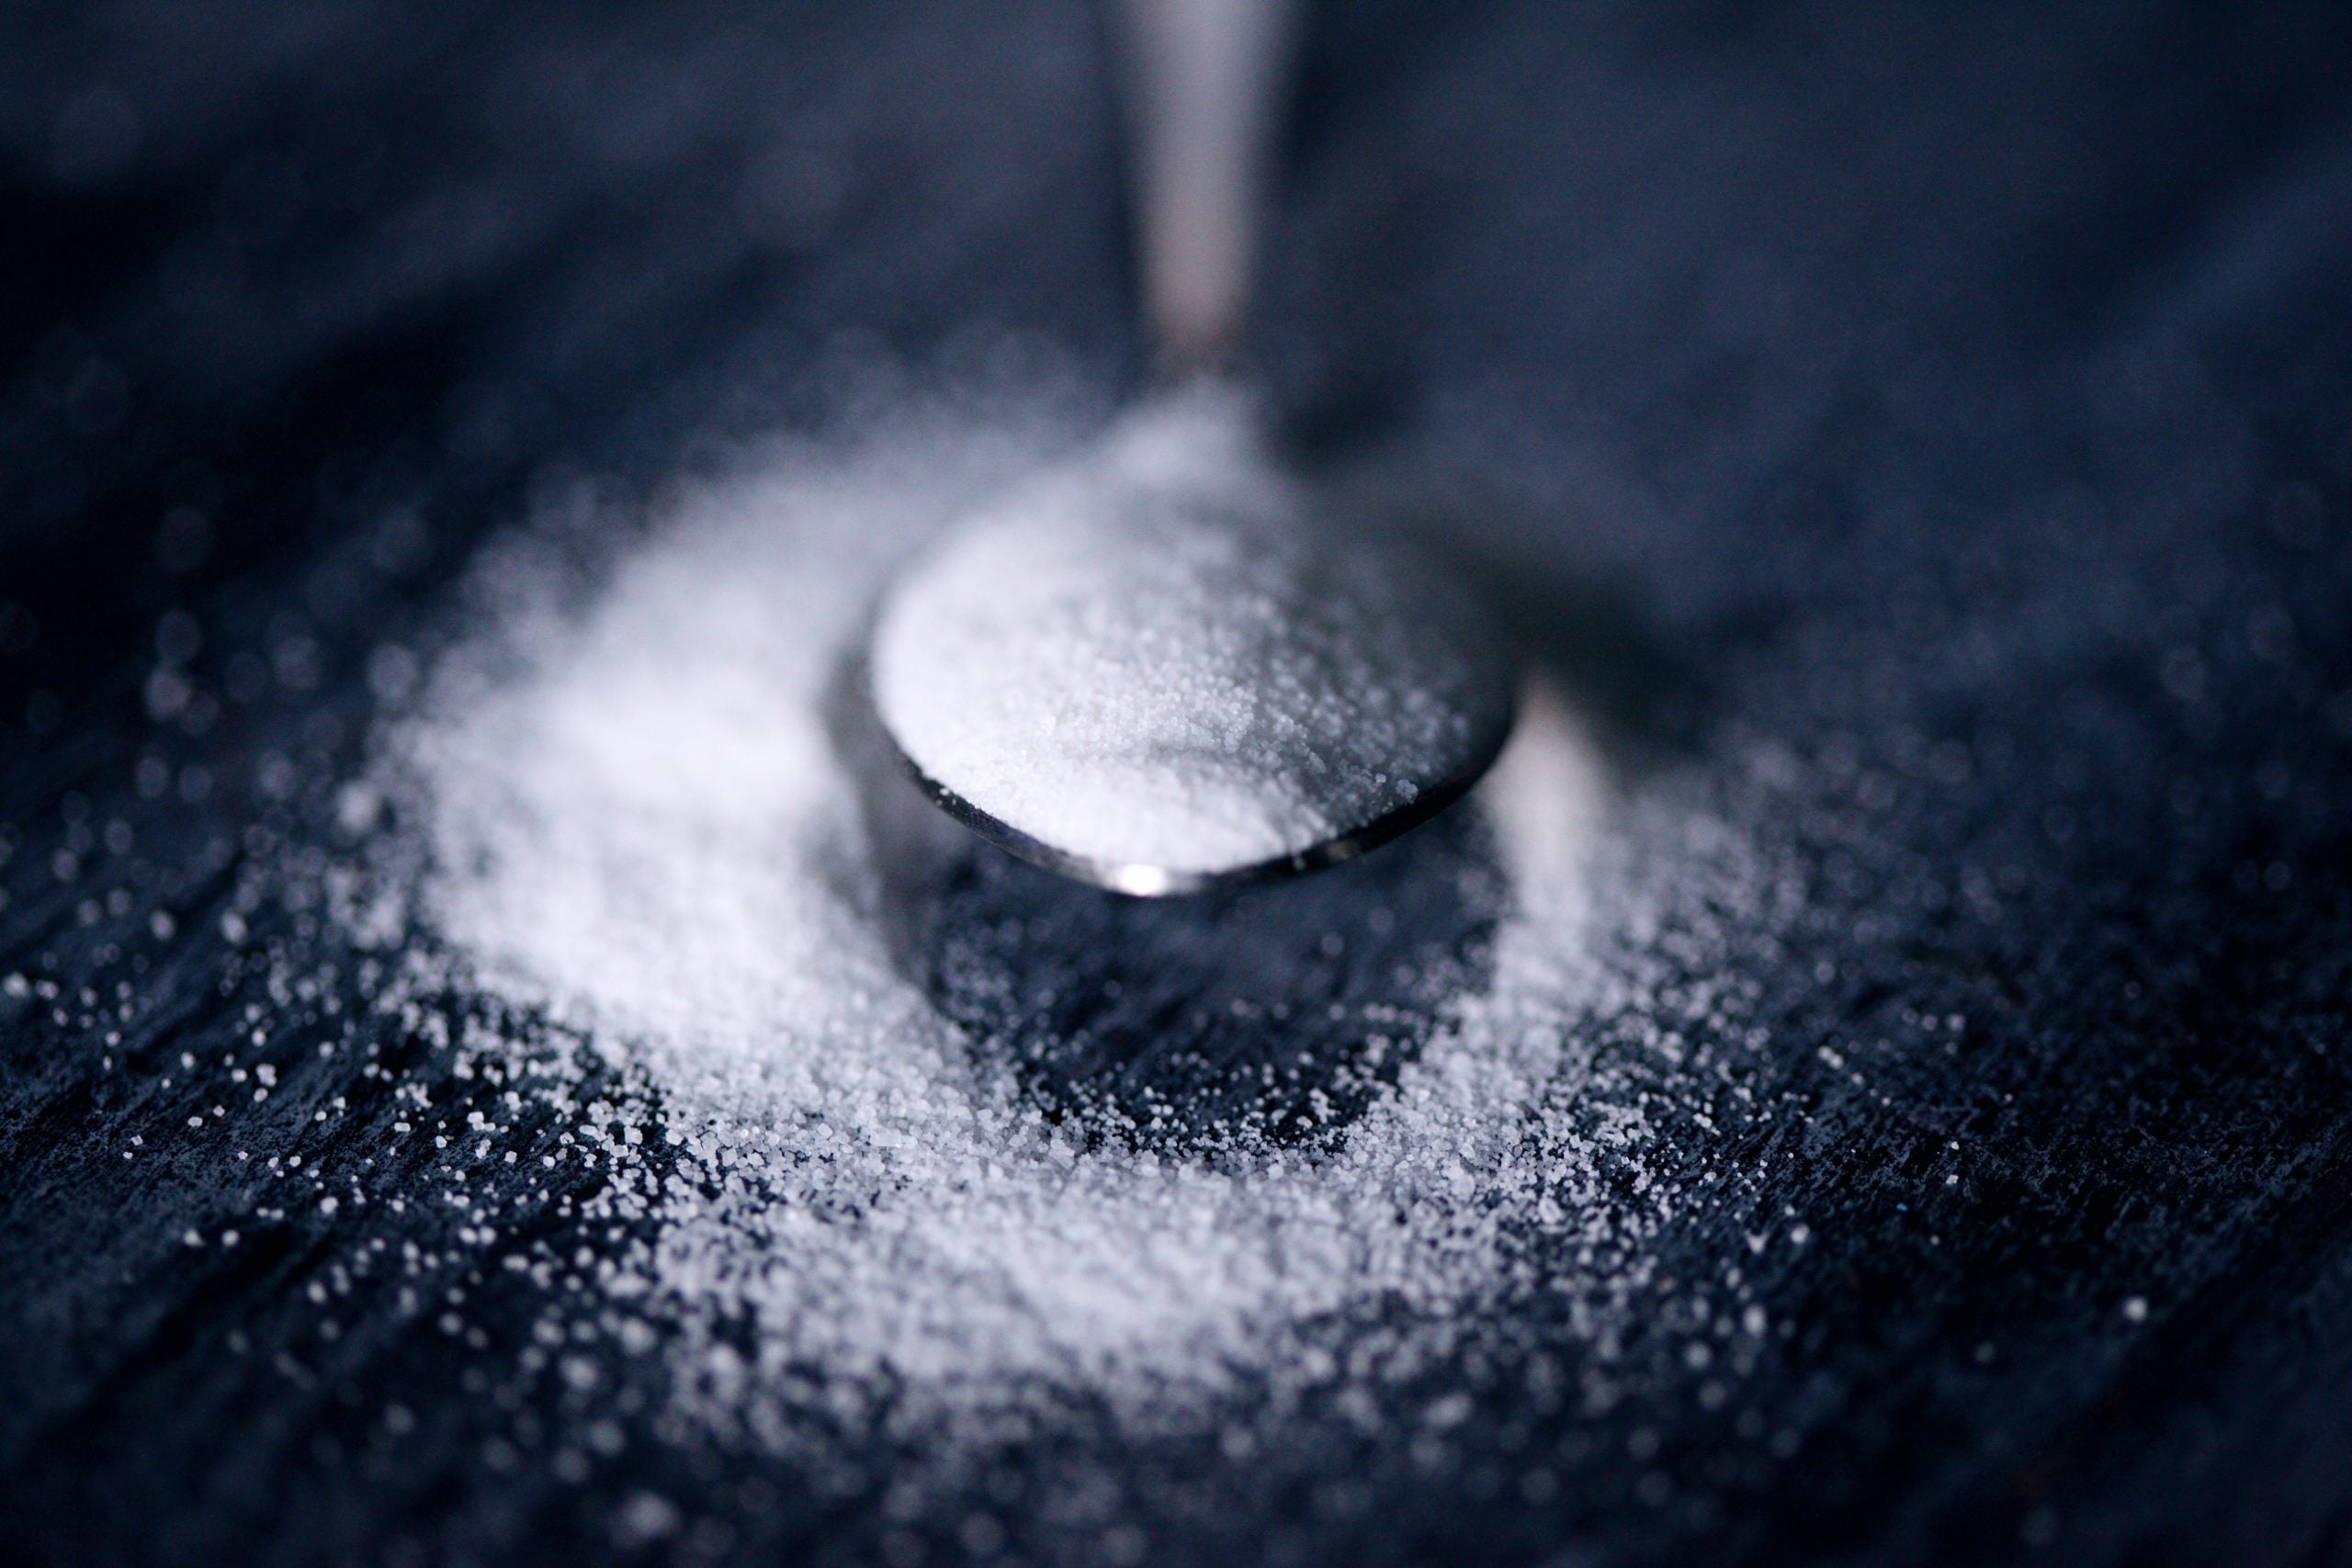 Revealed | Where to Find Hidden Sugars